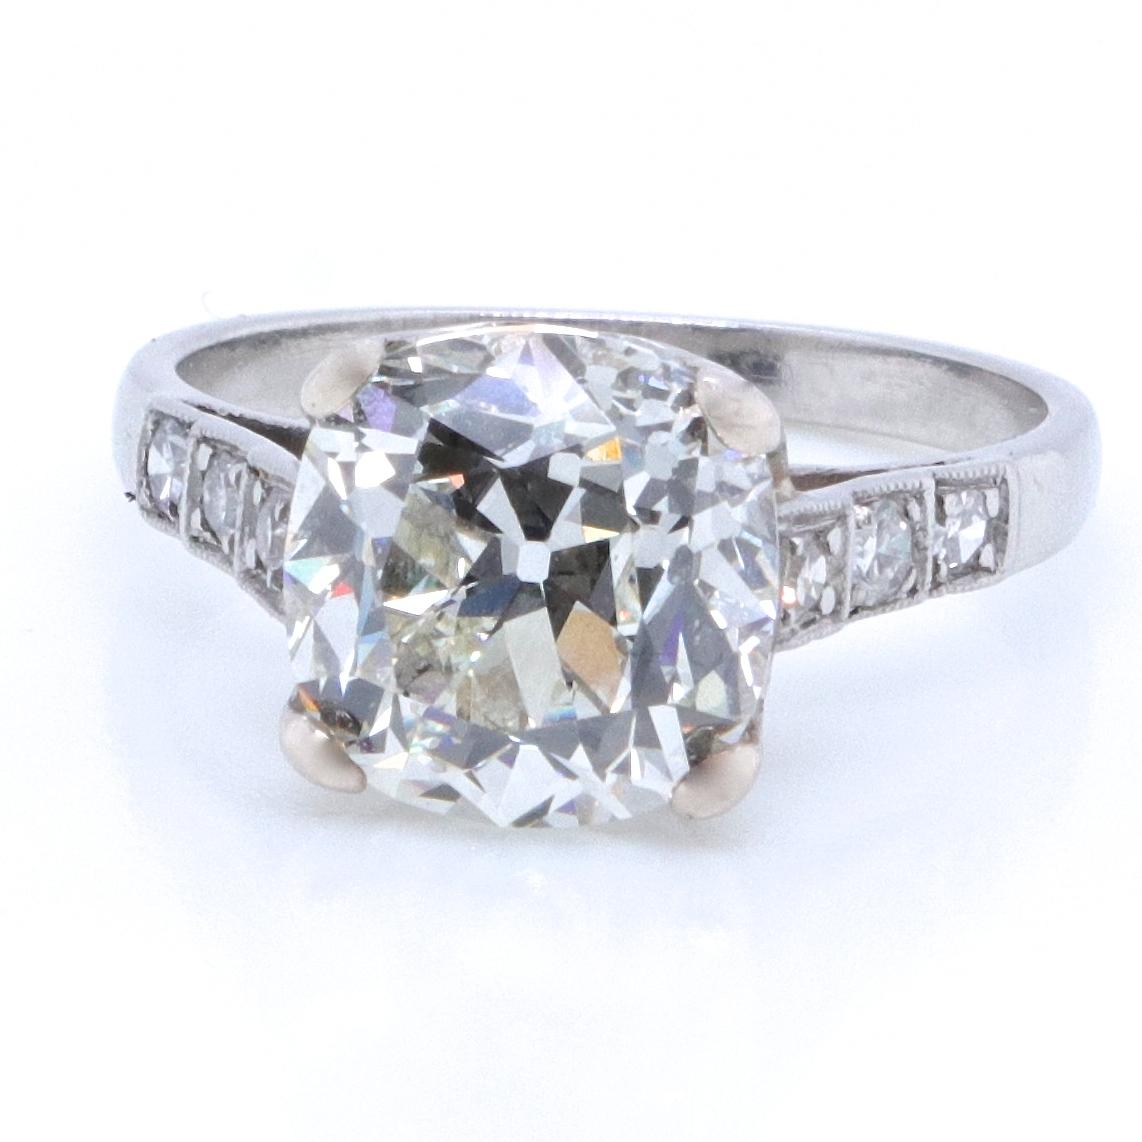 The ultimate antique engagement ring. The perfect diamond, setting and the stunning band, all make a dream ring. No matter where you go, this ring is definitely eye-catching. Art Deco GIA certified 4.02 carat antique cushion cut, K color, VS1